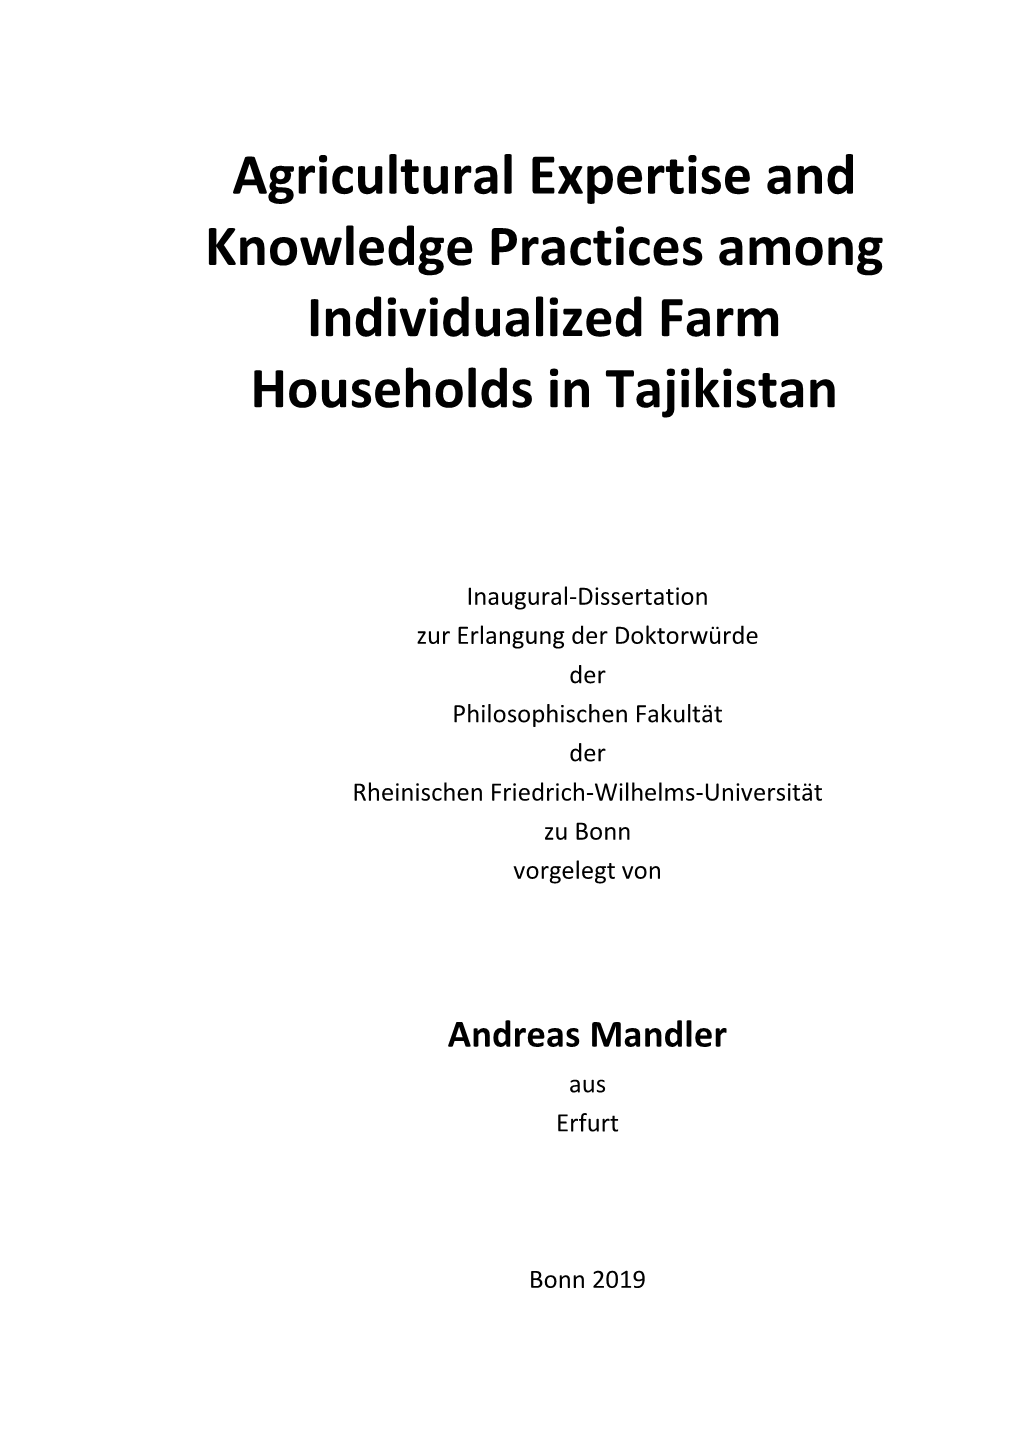 Agricultural Expertise and Knowledge Practices Among Individualized Farm Households in Tajikistan